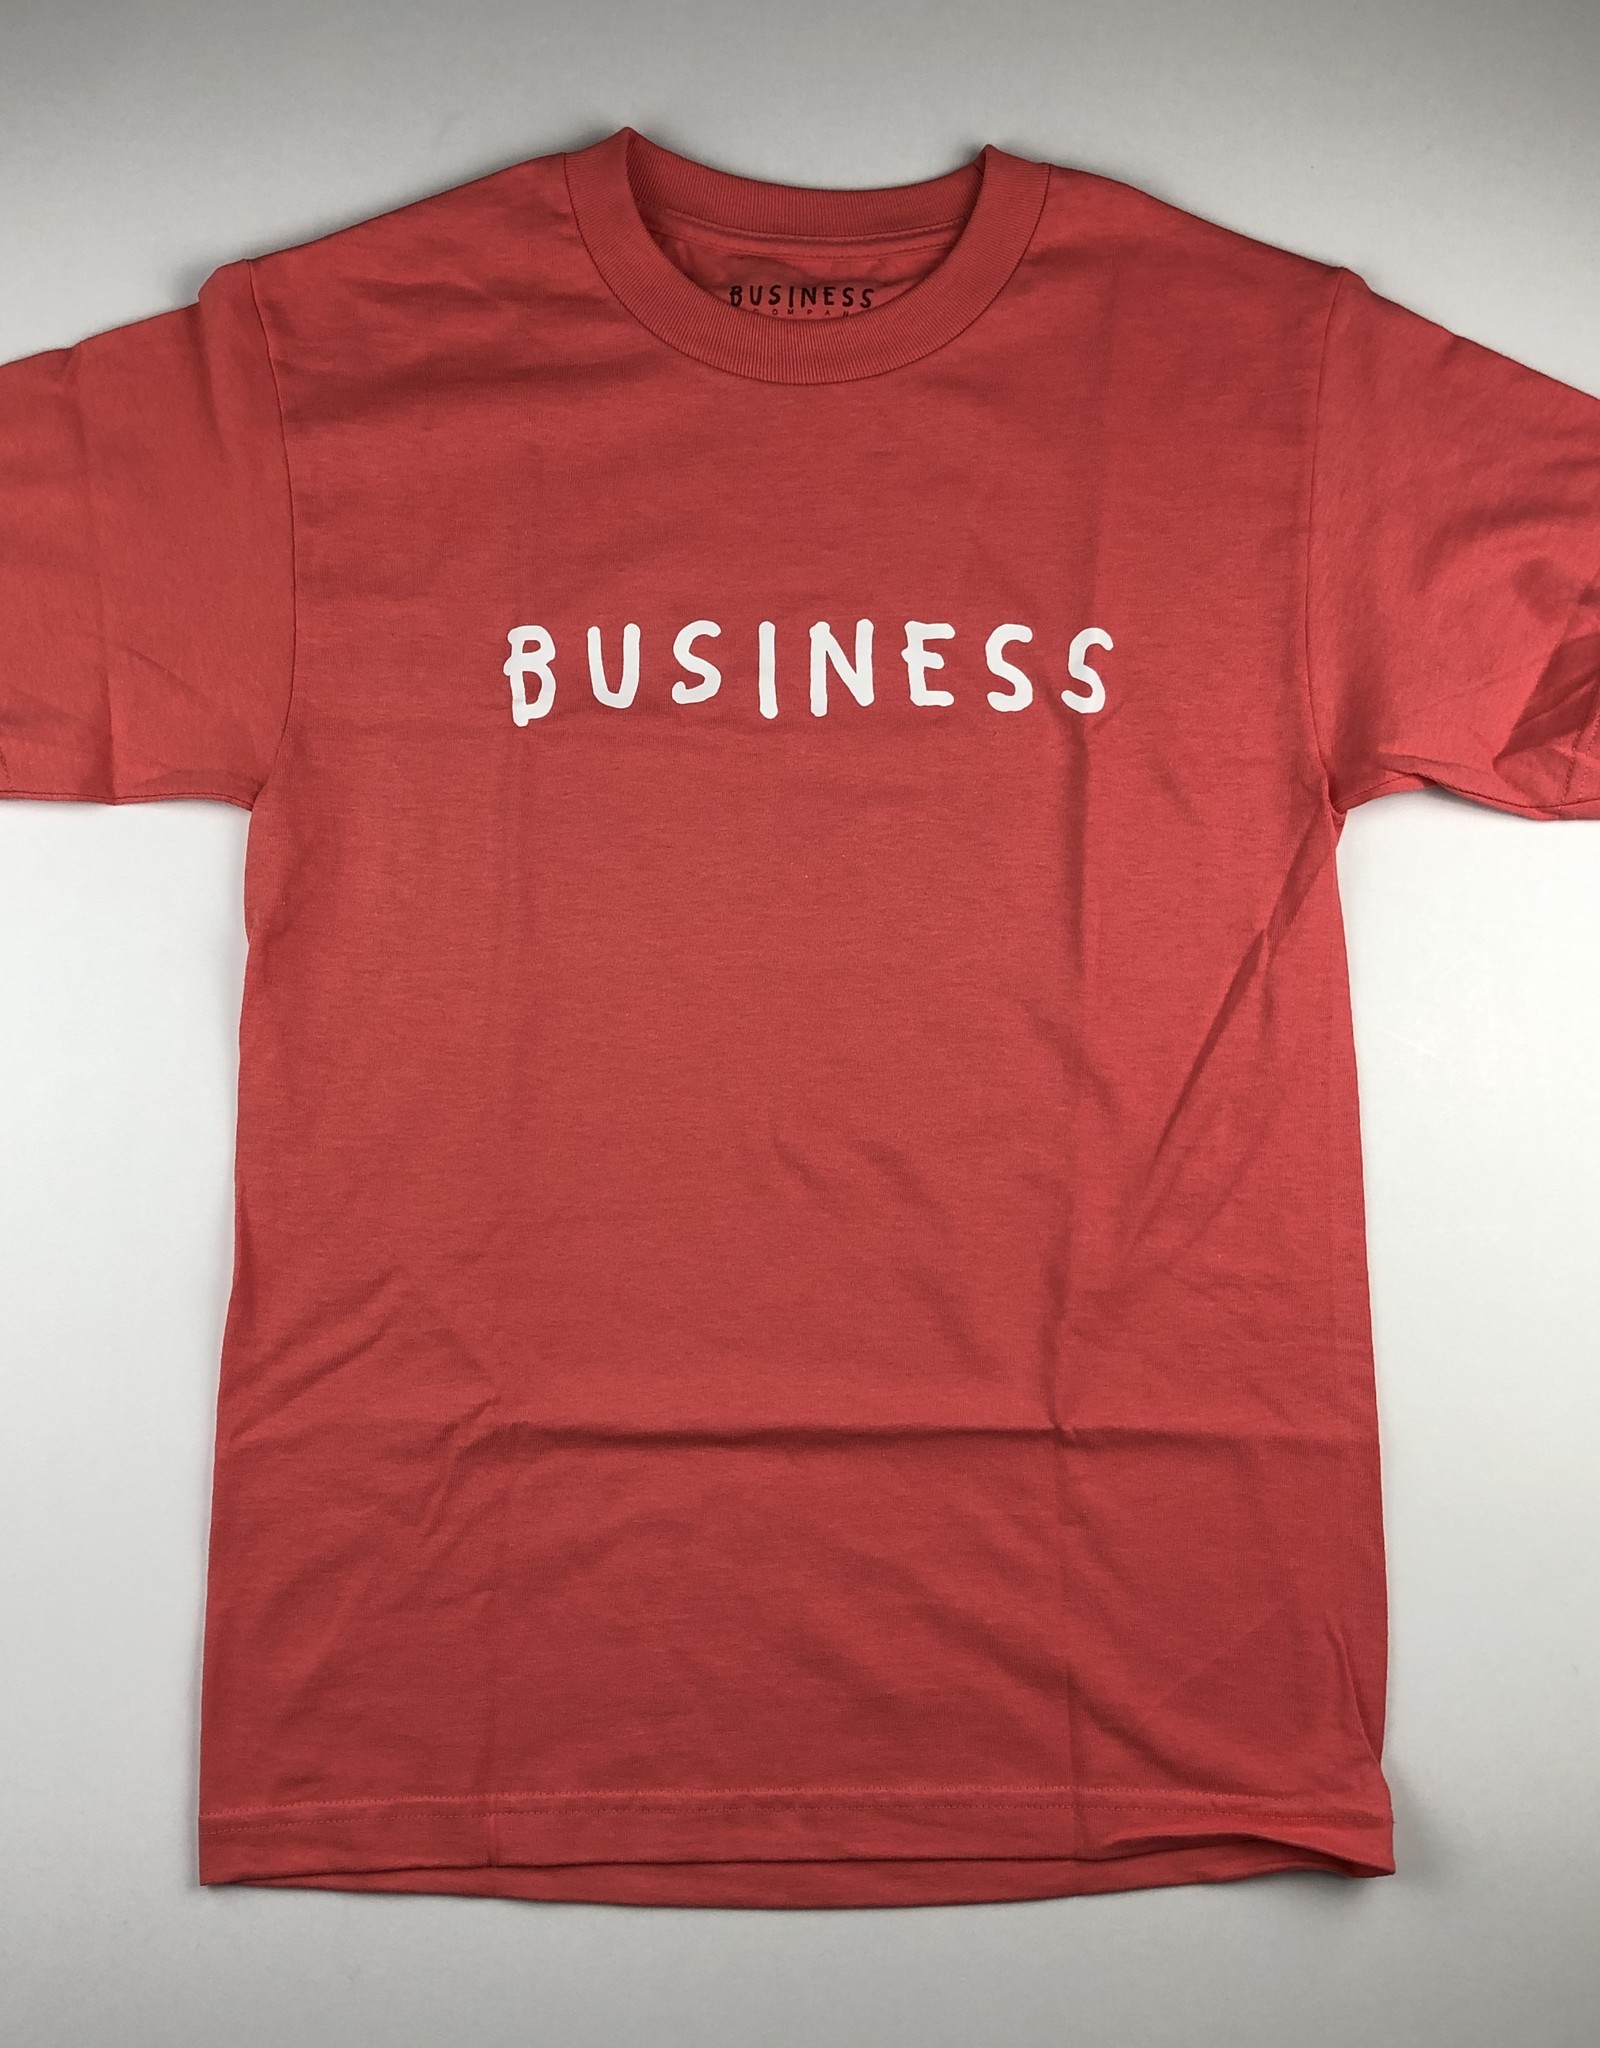 BUSINESS AND COMPANY BUSINESS AND COMPANY “BUSINESS” S/S TEE - CORAL